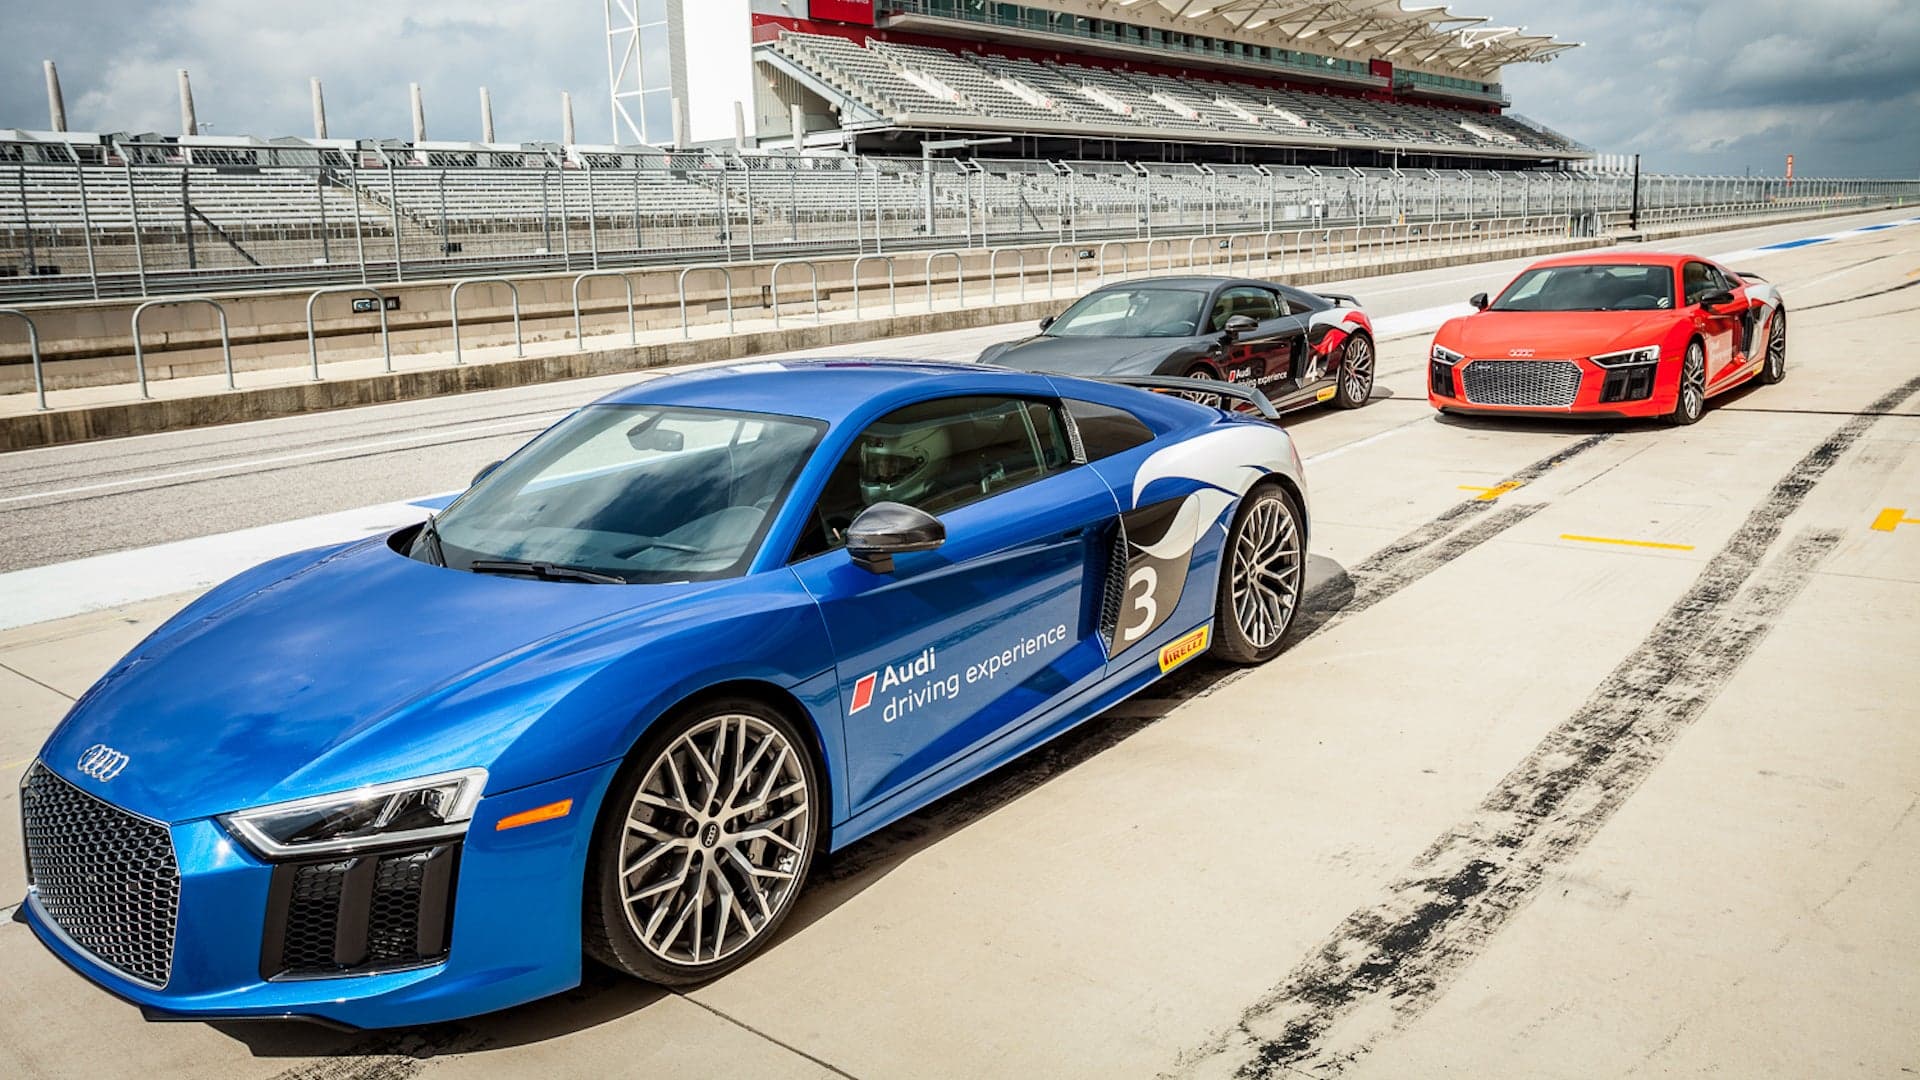 Audi Will Let You Drive an R8 V10 Plus at Circuit of the Americas